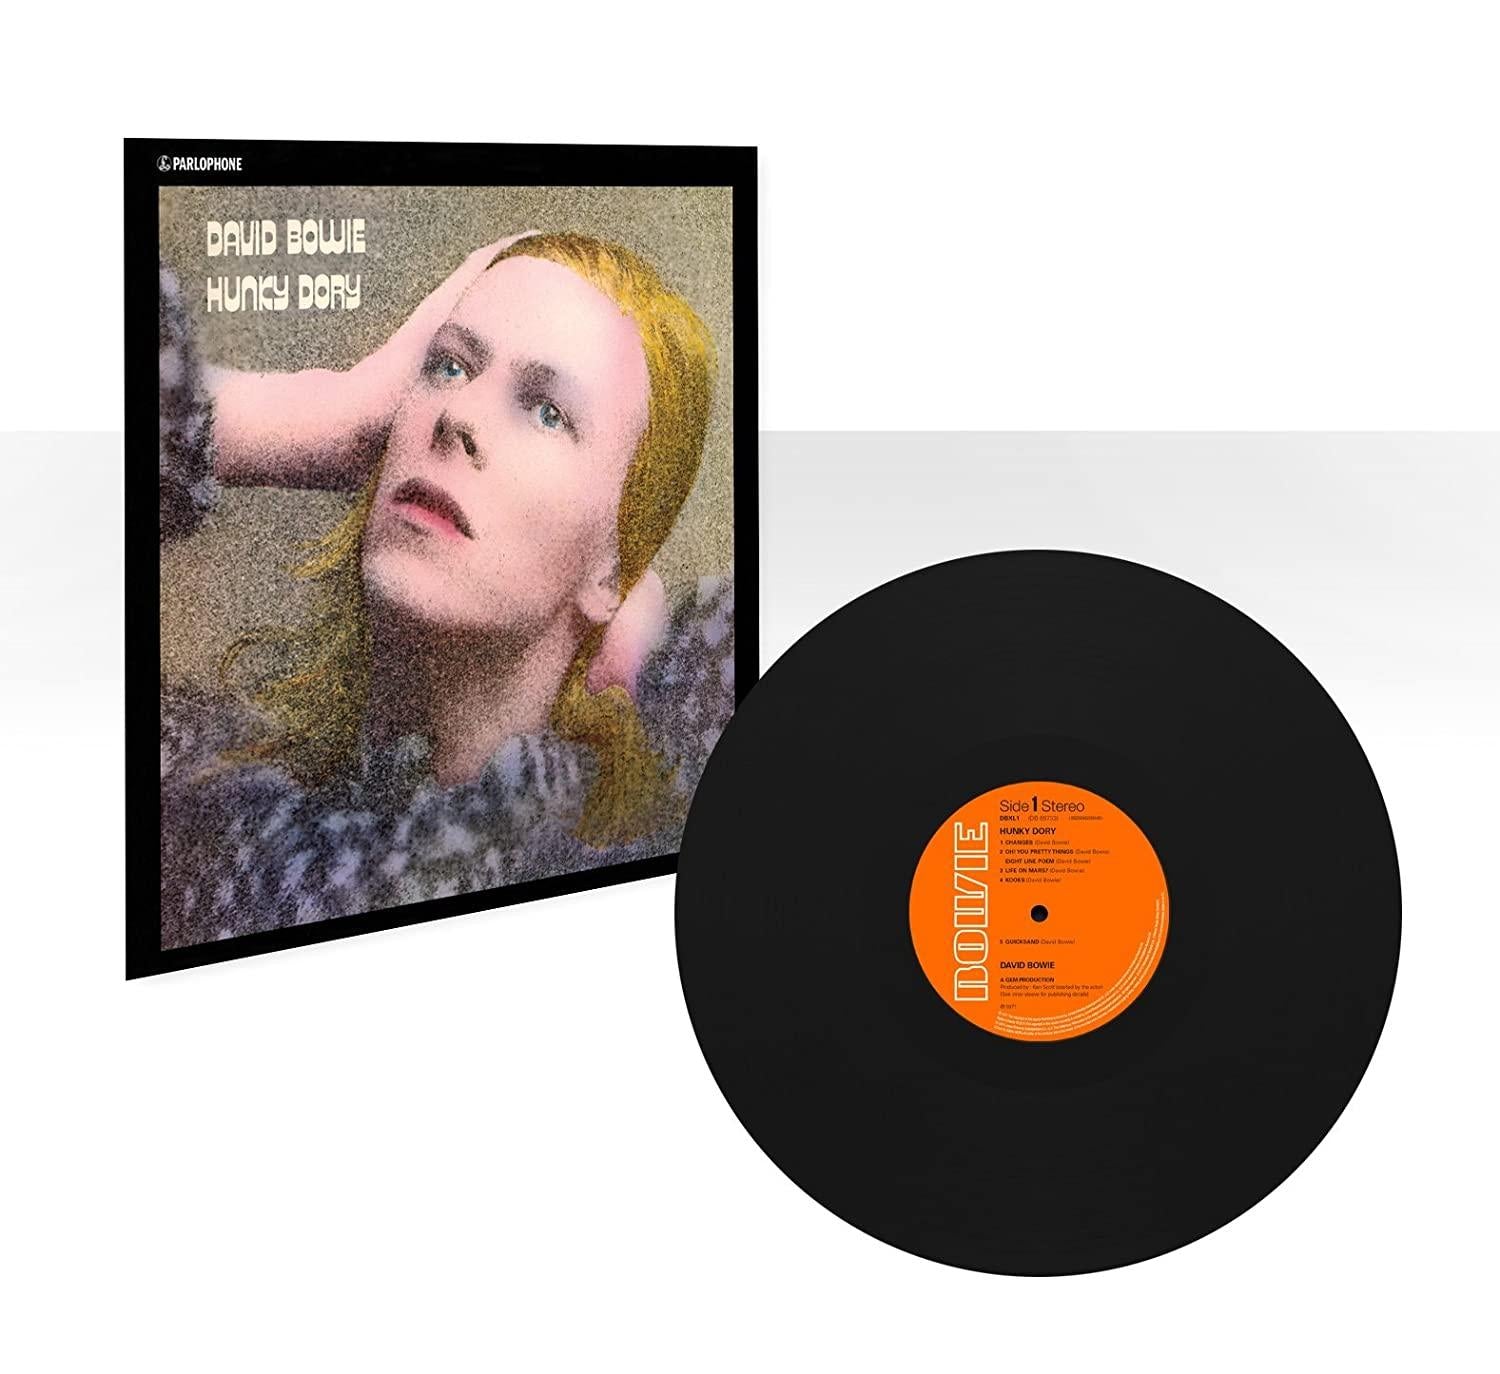 David Bowie - Hunky Dory (Remastered, 180 Gram) (LP)